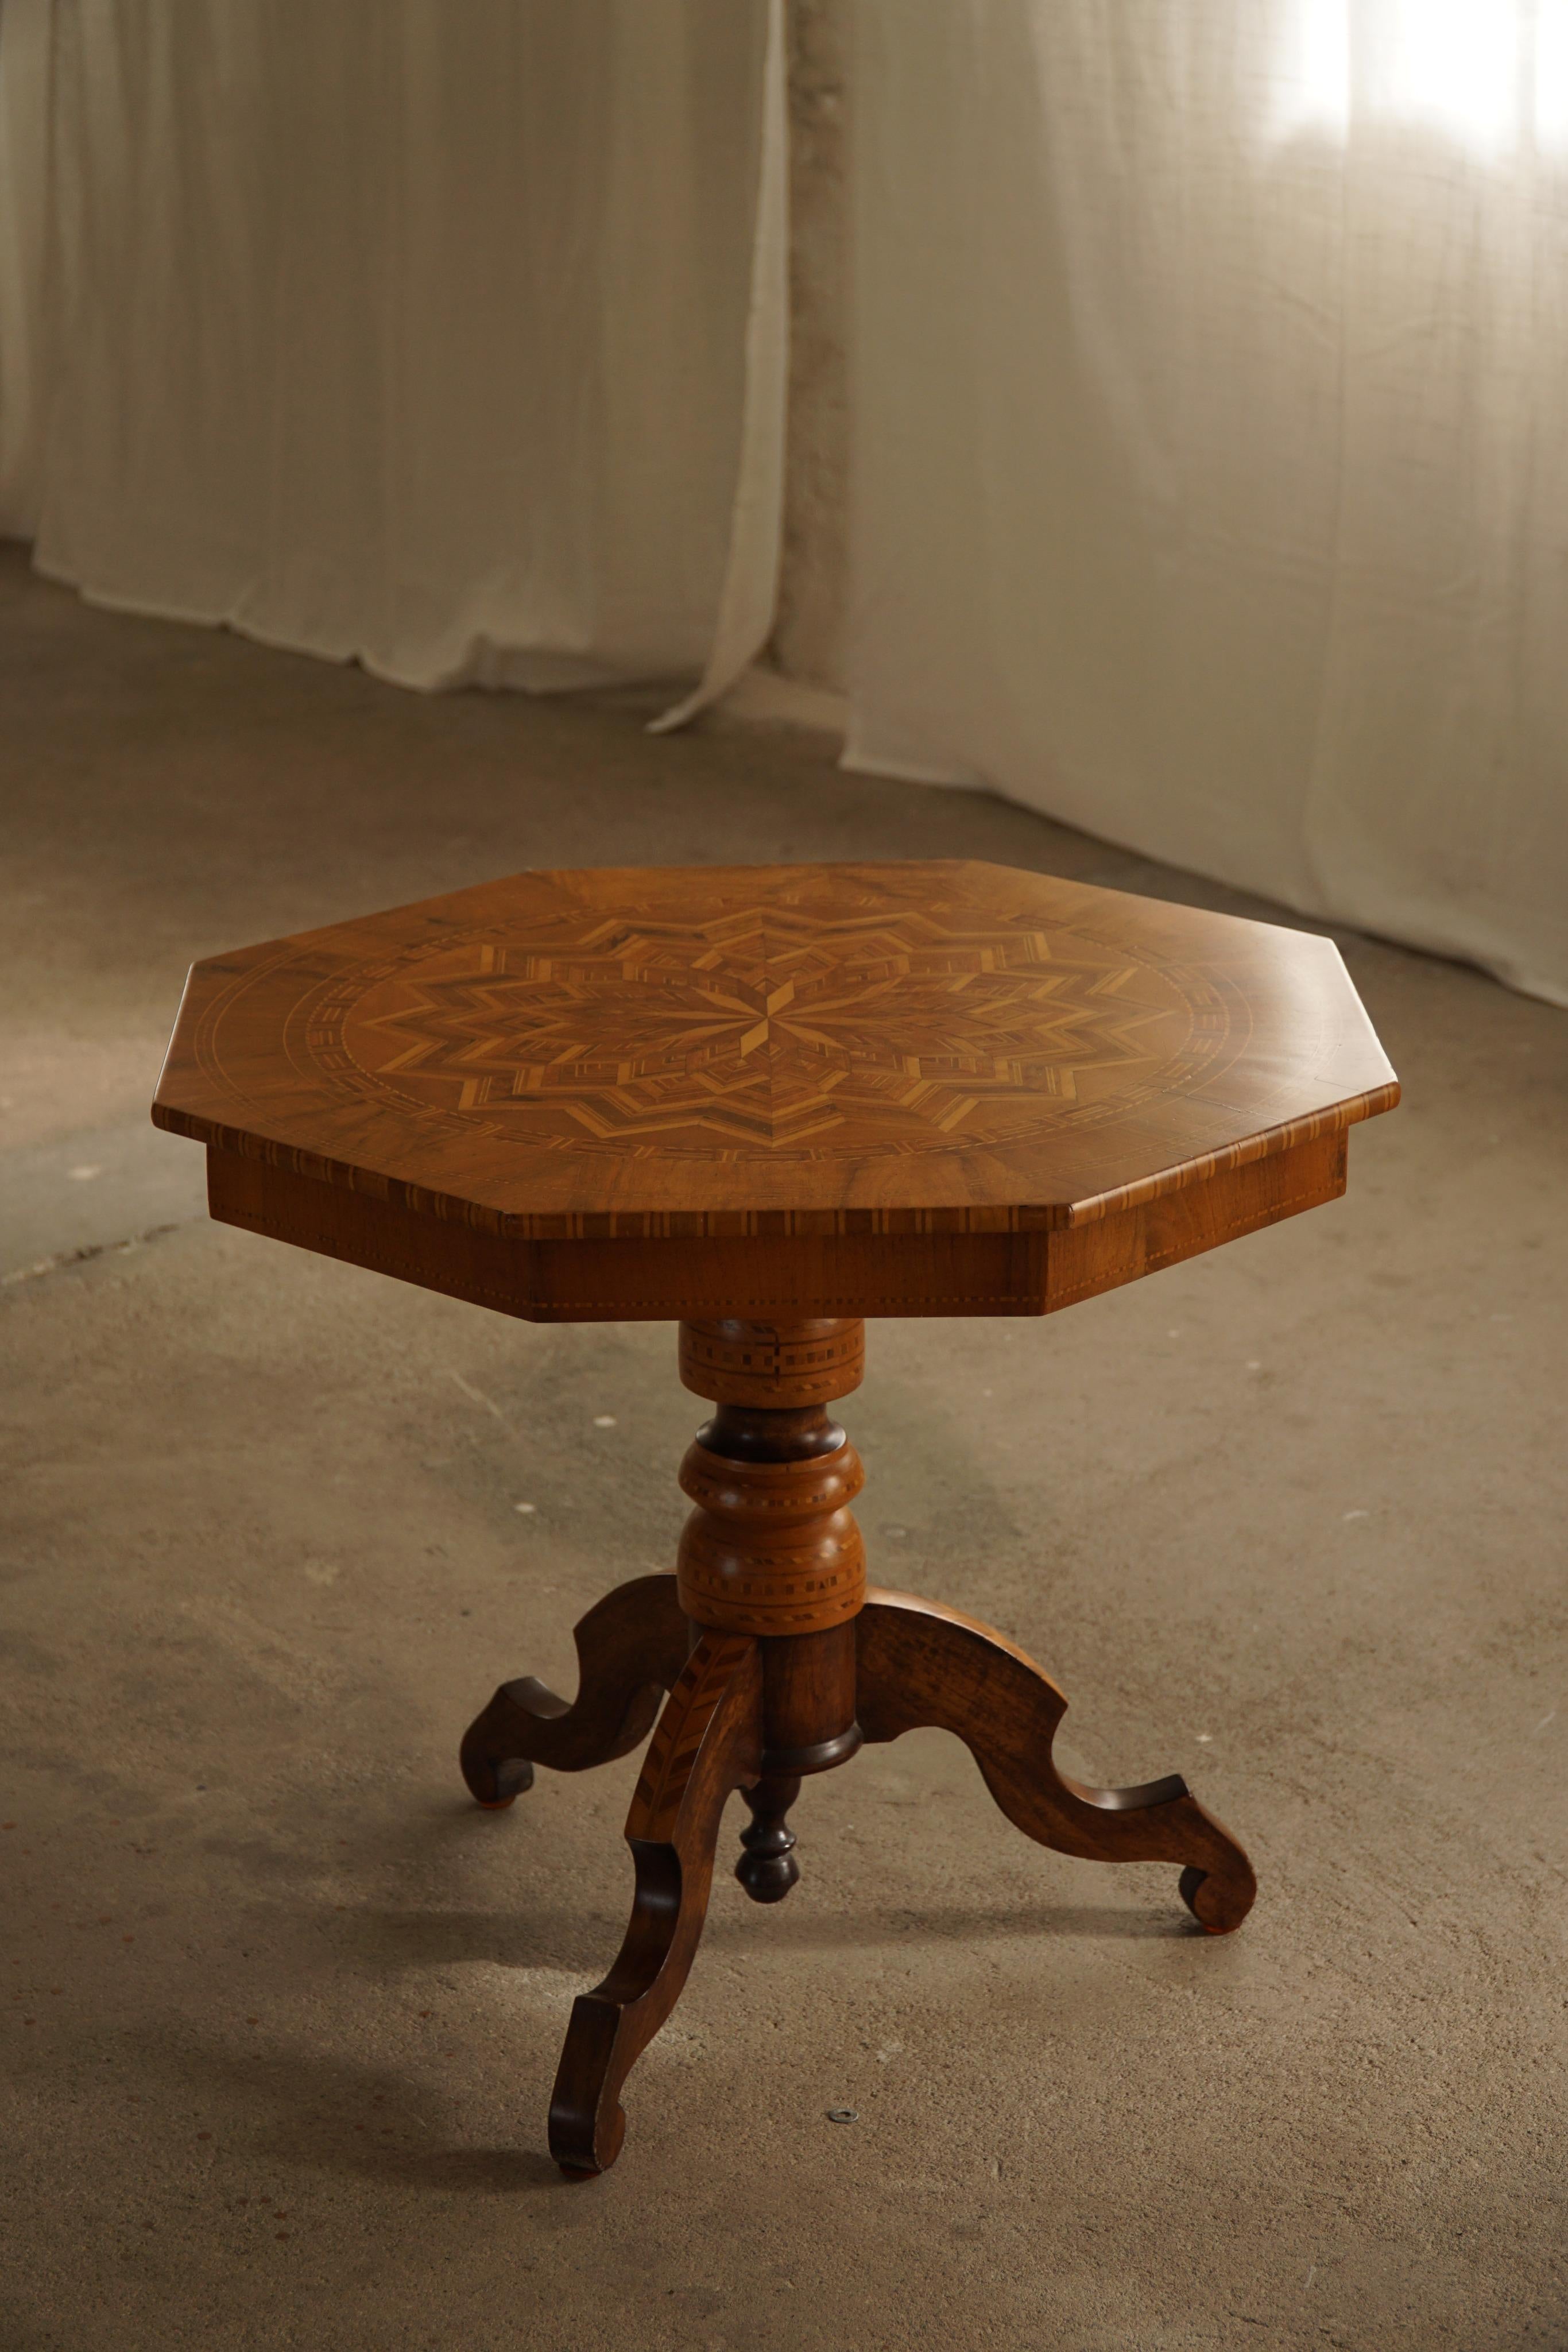 Danish Art Deco, Octagon Side Table in Birch With Intarsia Top, 1940s For Sale 2